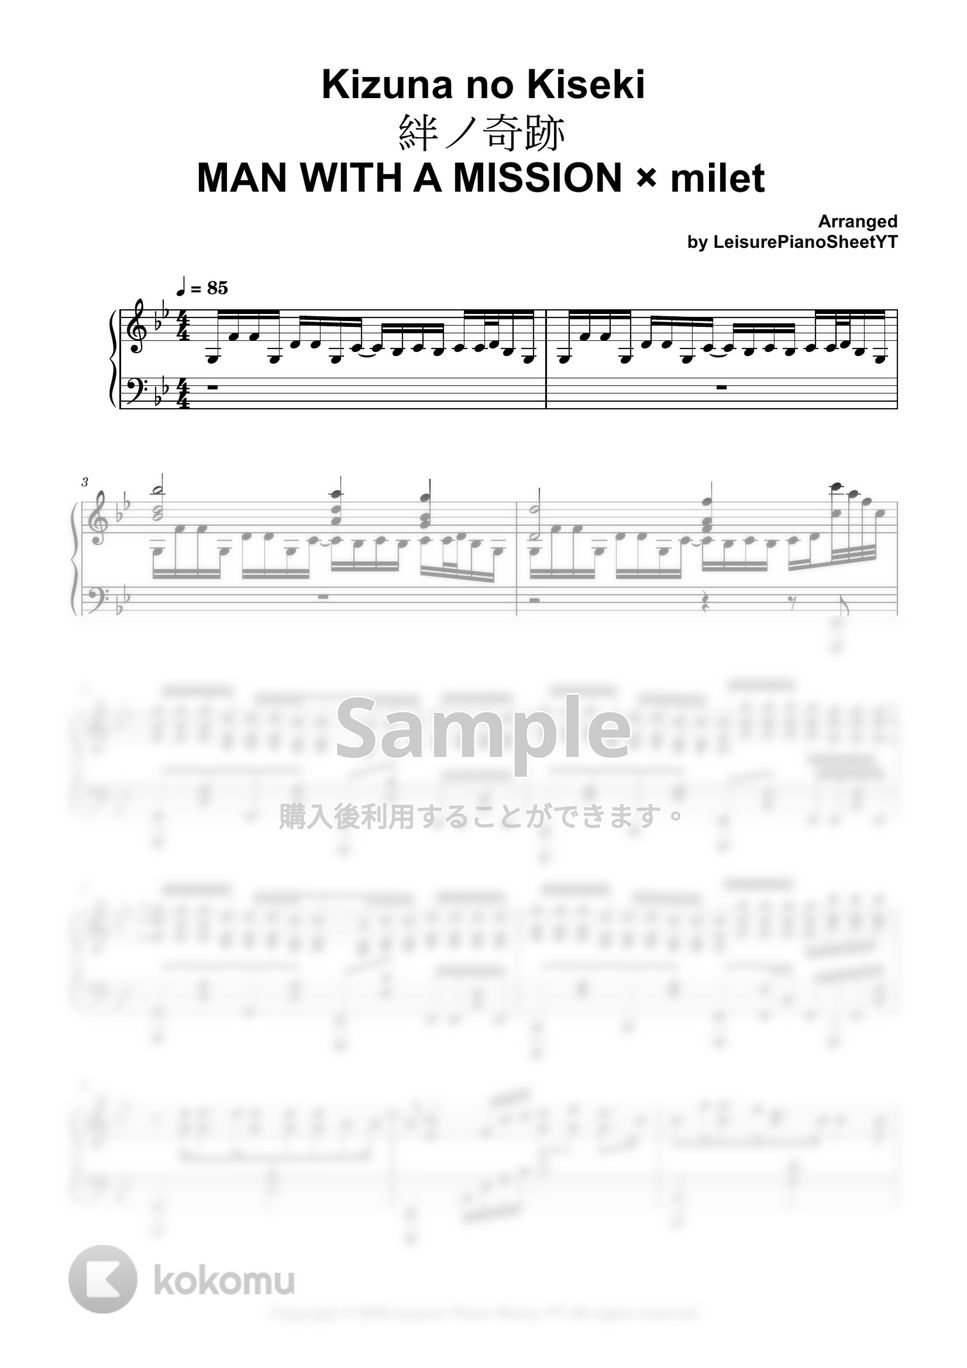 MAN WITH A MISSION × milet - 鬼滅の刃刀鍛冶の里編 OP 絆ノ奇跡 by Leisure Piano Sheets